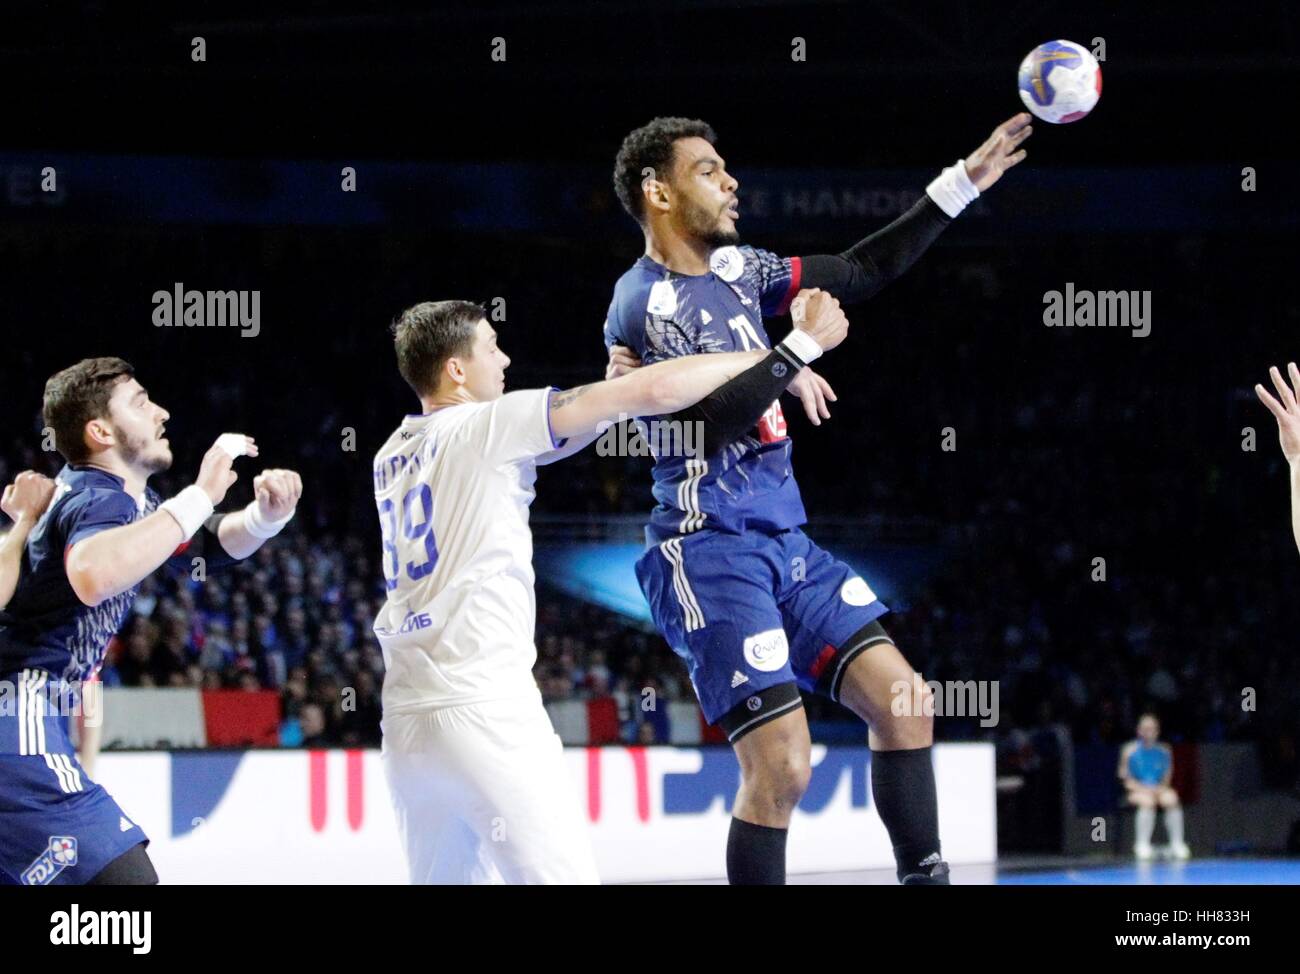 Nantes, France. 17th January, 2017. Adrien Dipanda of France seen during the France vs Russia game for the Men's Handball Championship in Nantes. Credit: Laurent Lairys/Agence Locevaphotos/Alamy Live News Stock Photo